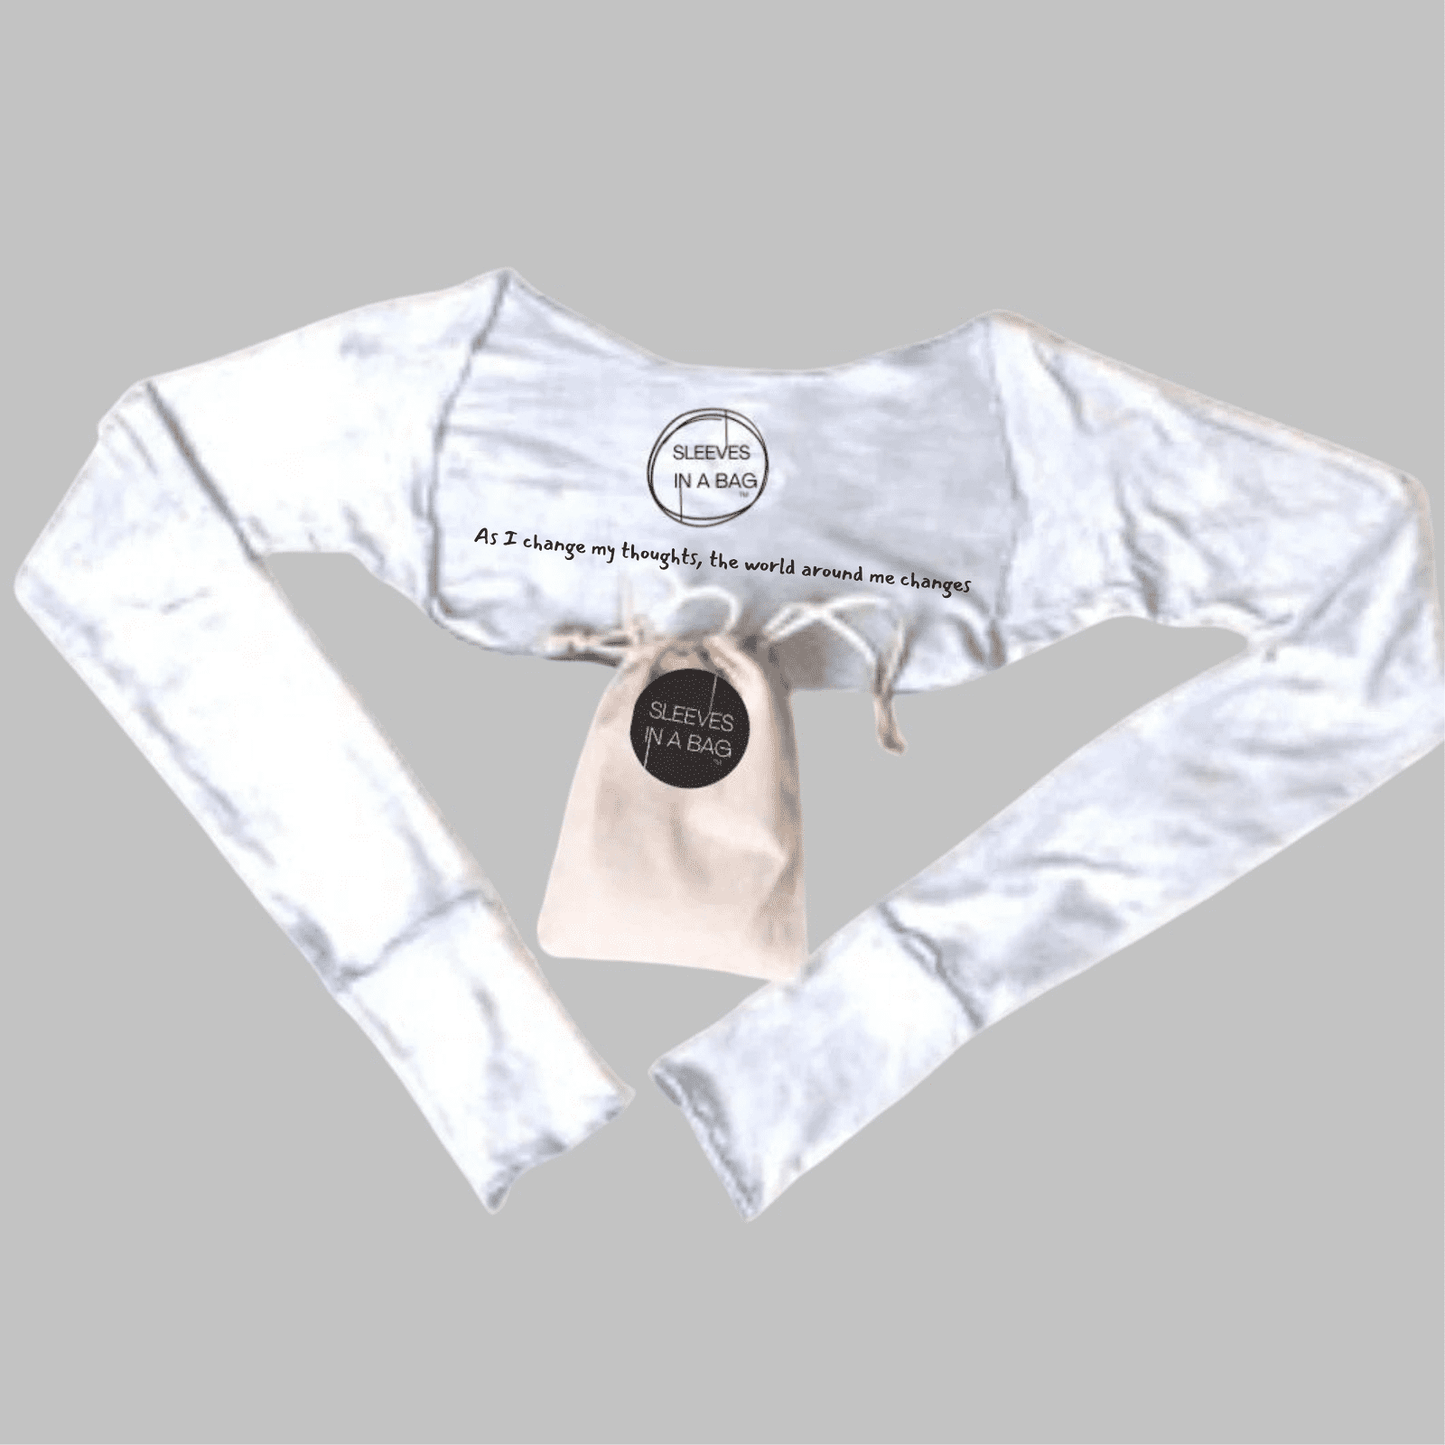 Add on an Affirmation for your Sleeves in a Bag